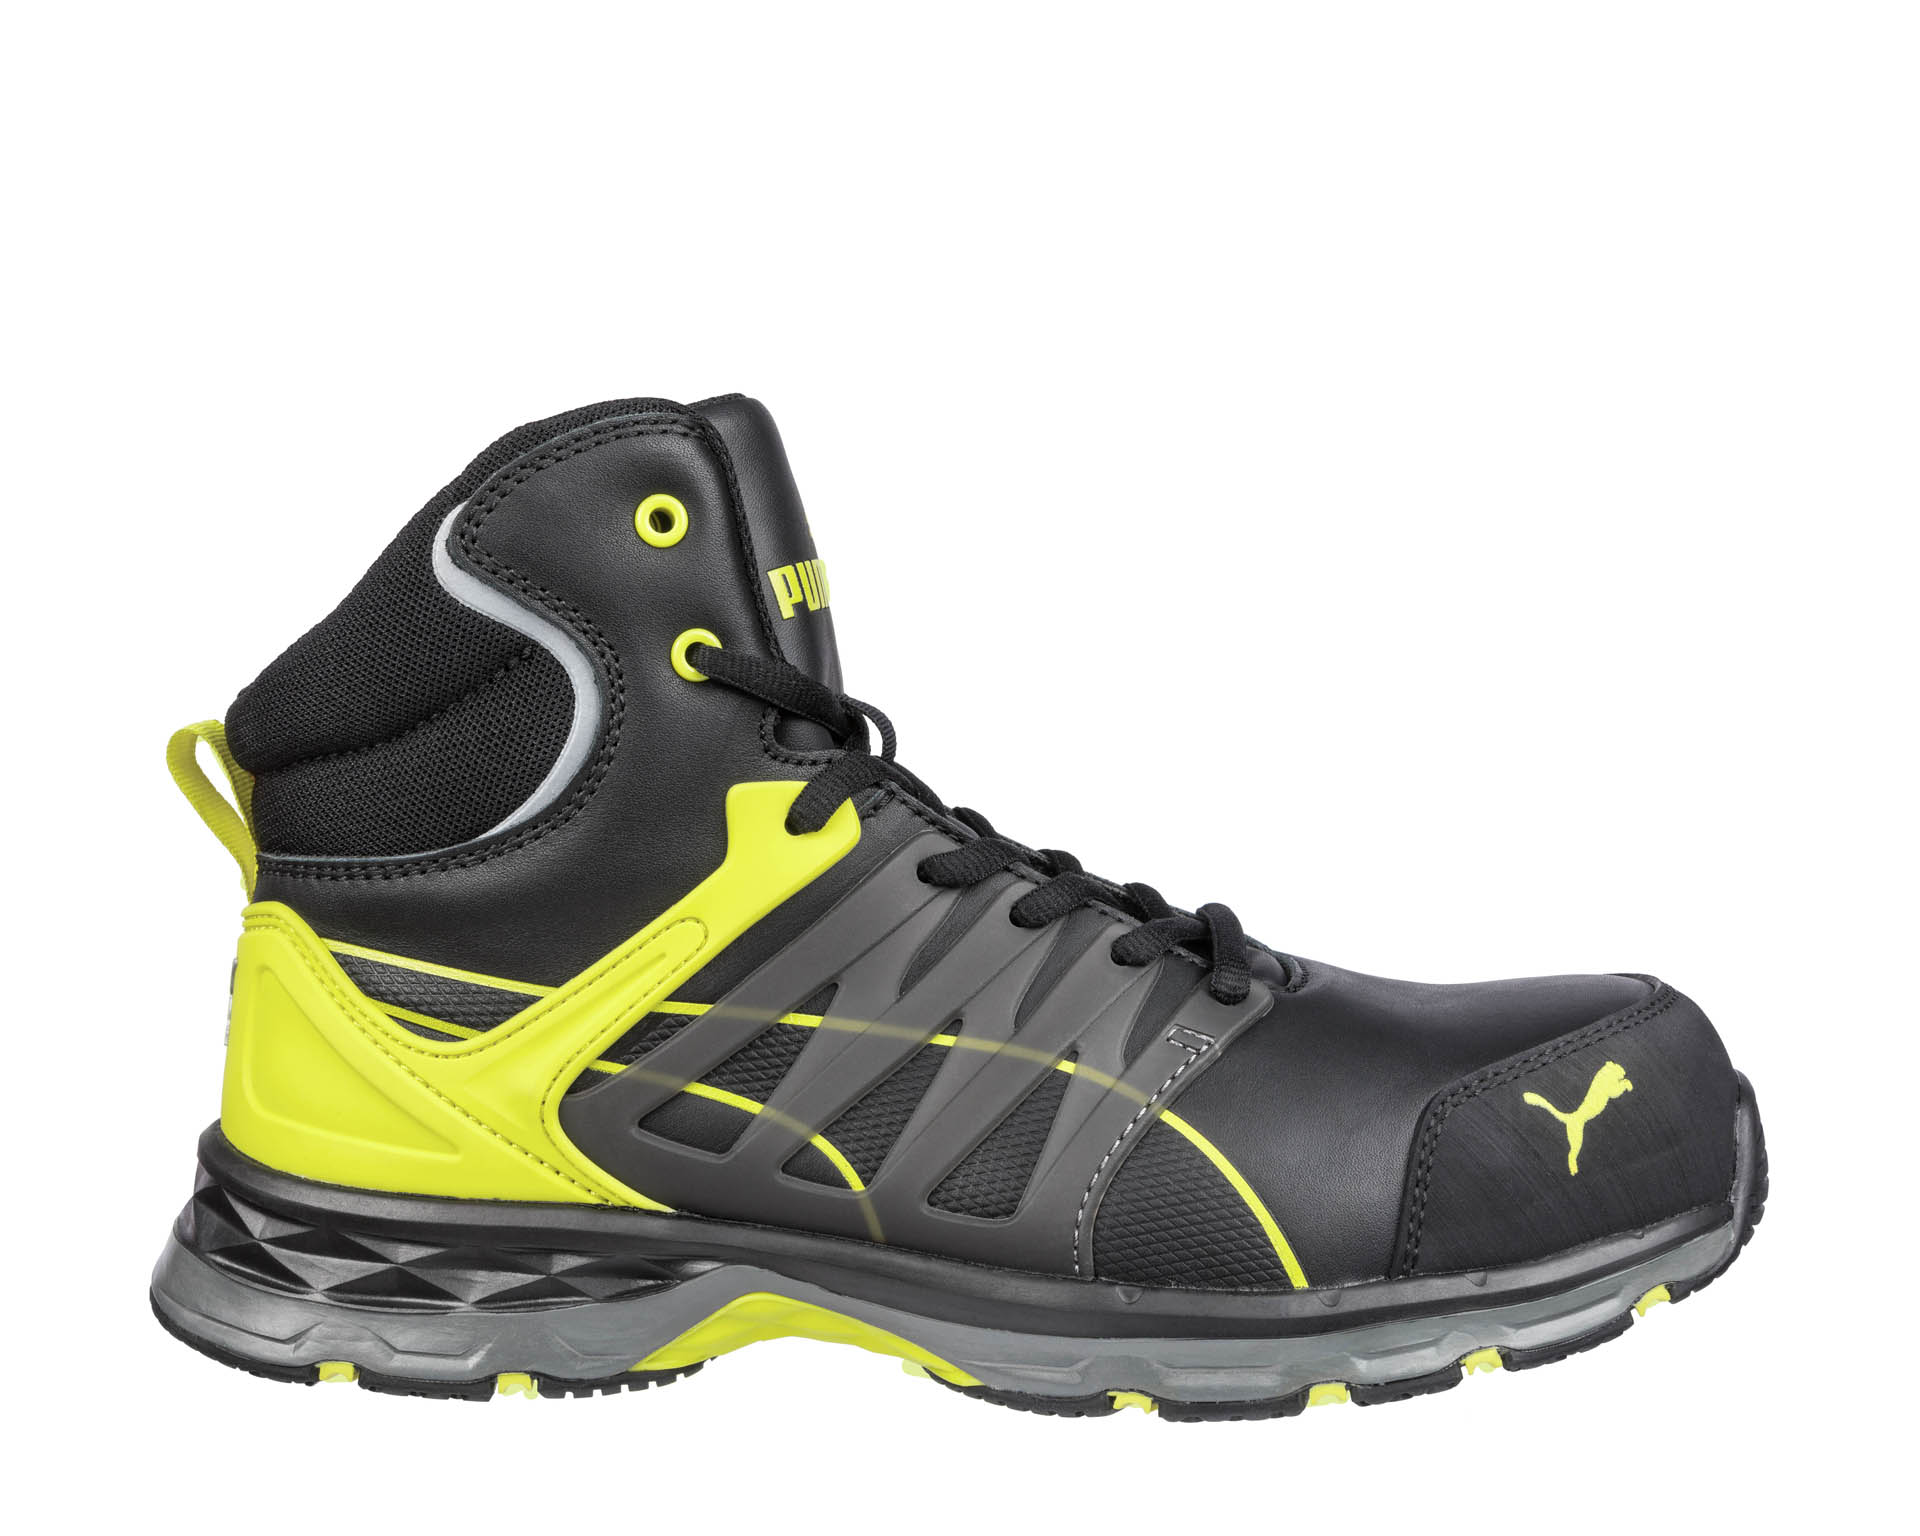 Puma Safety SAFETY PUMA 2.0 shoes SRC ESD | MID VELOCITY YELLOW HRO safety S3 English